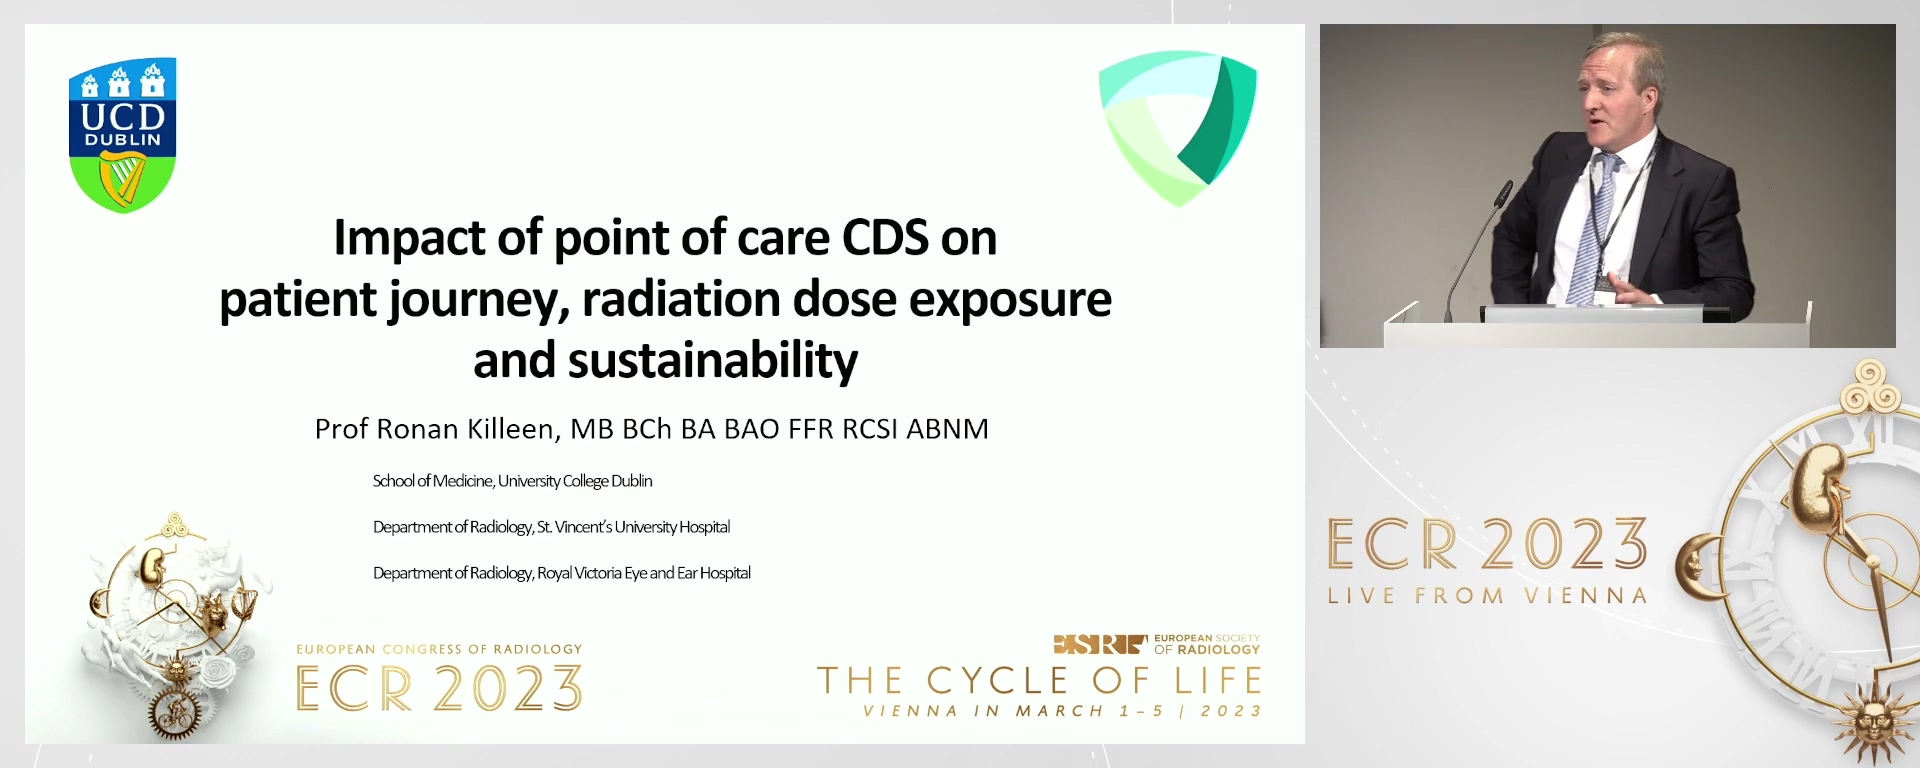 Impact of point of care CDS on patient journey, radiation dose exposure and sustainability - Ronan P Killeen, Dublin / IE